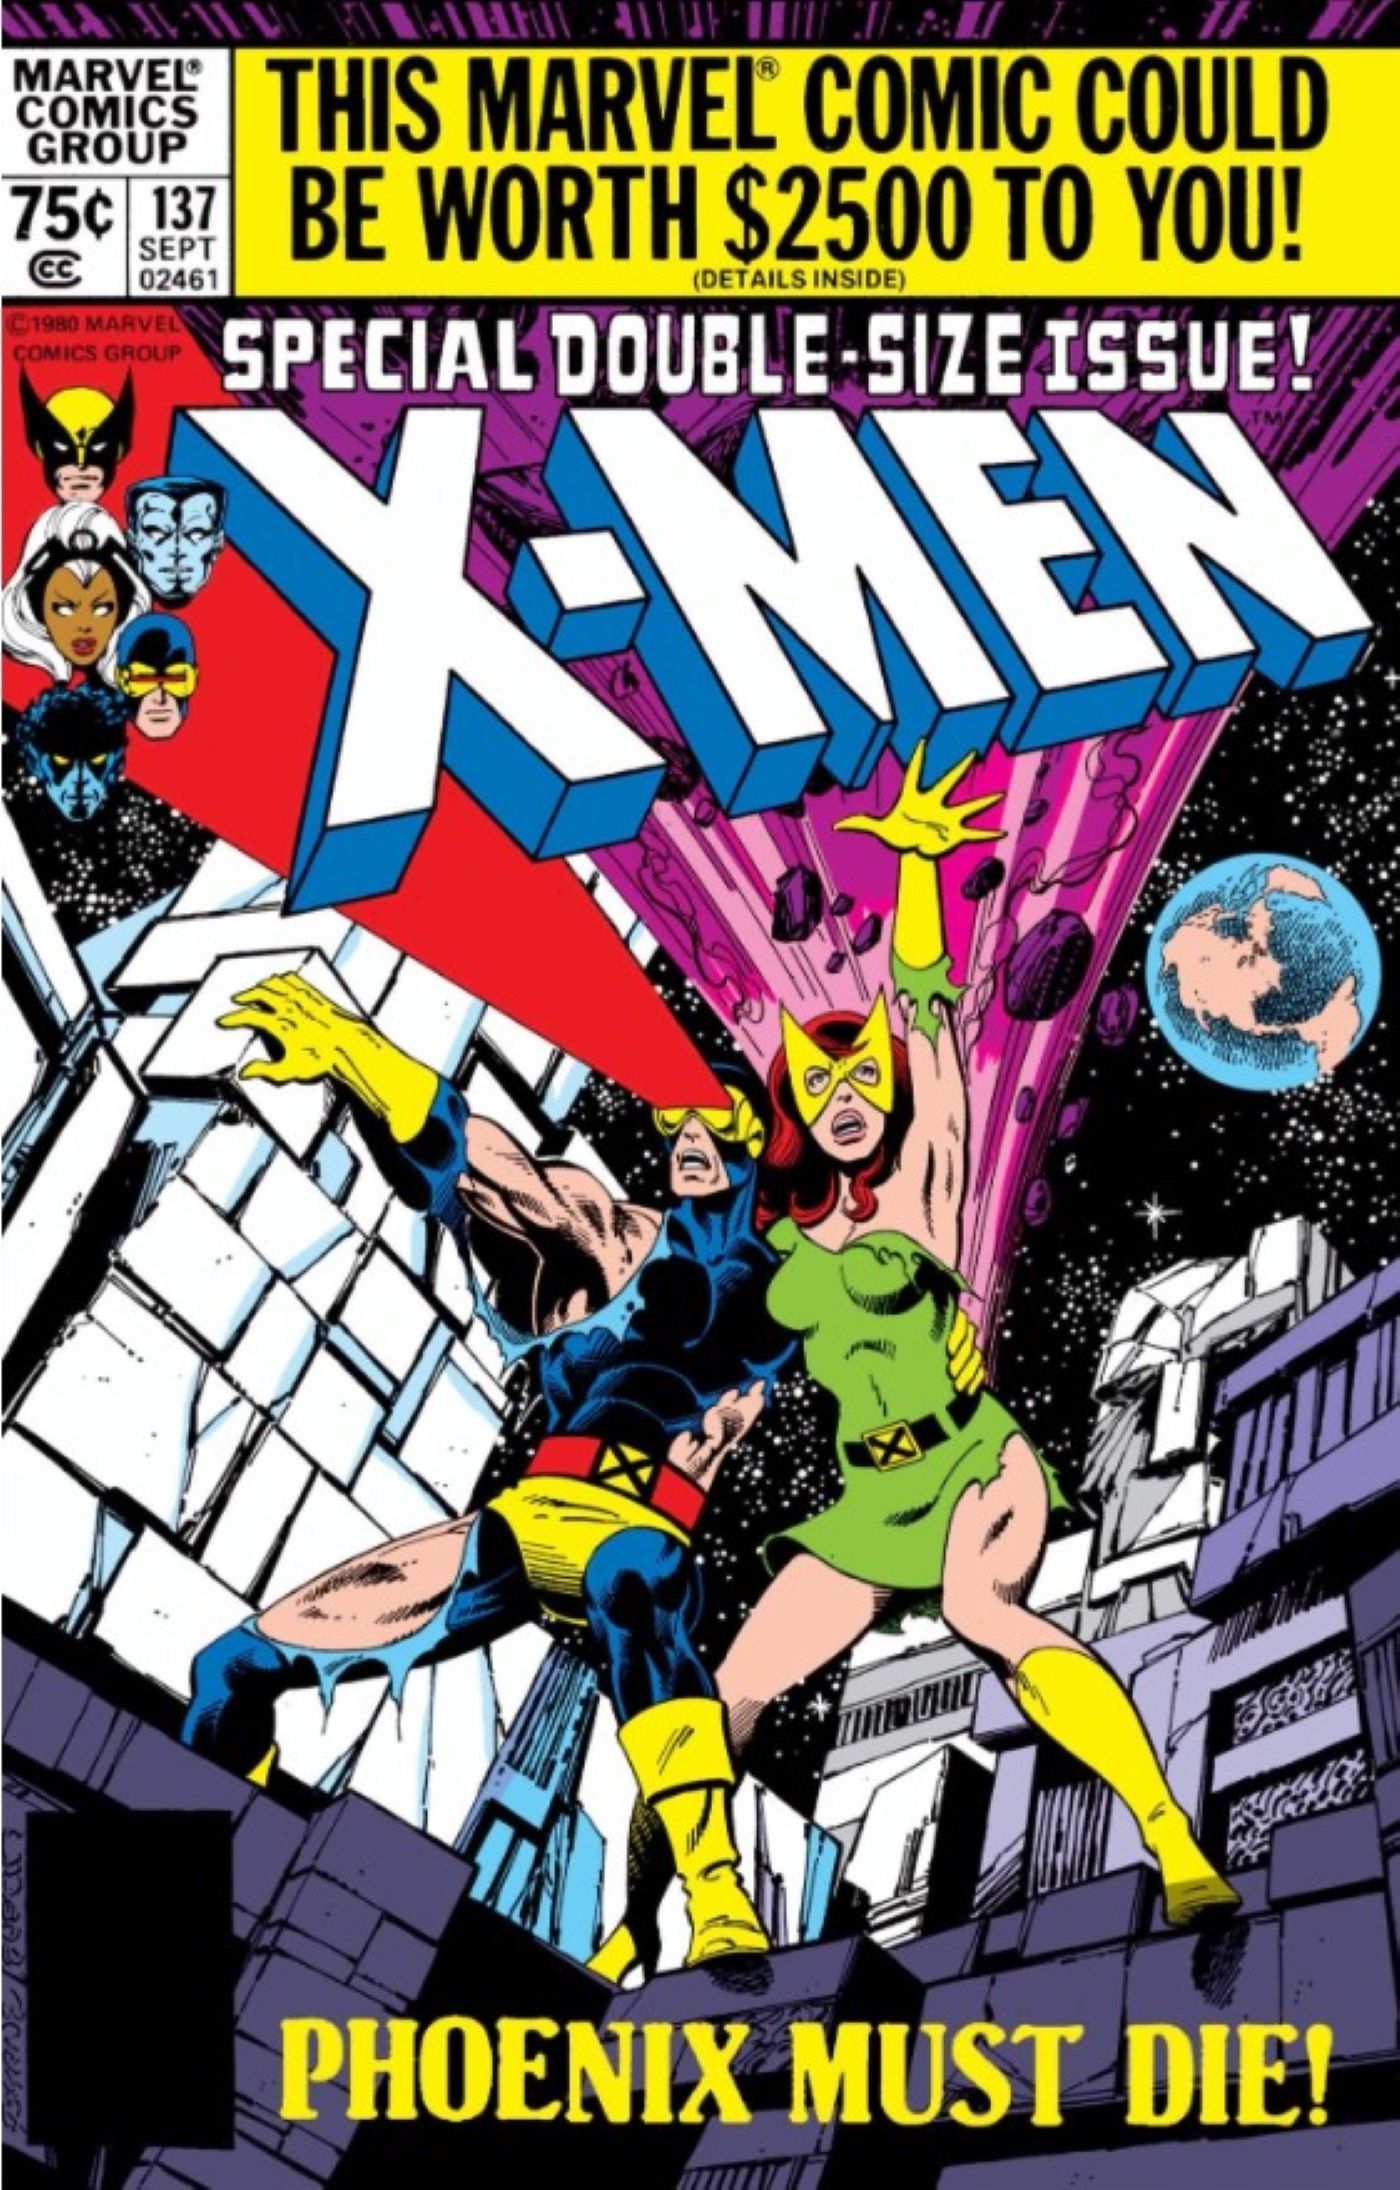 X-Men #137 cover featuring Jean Grey and Cyclops 